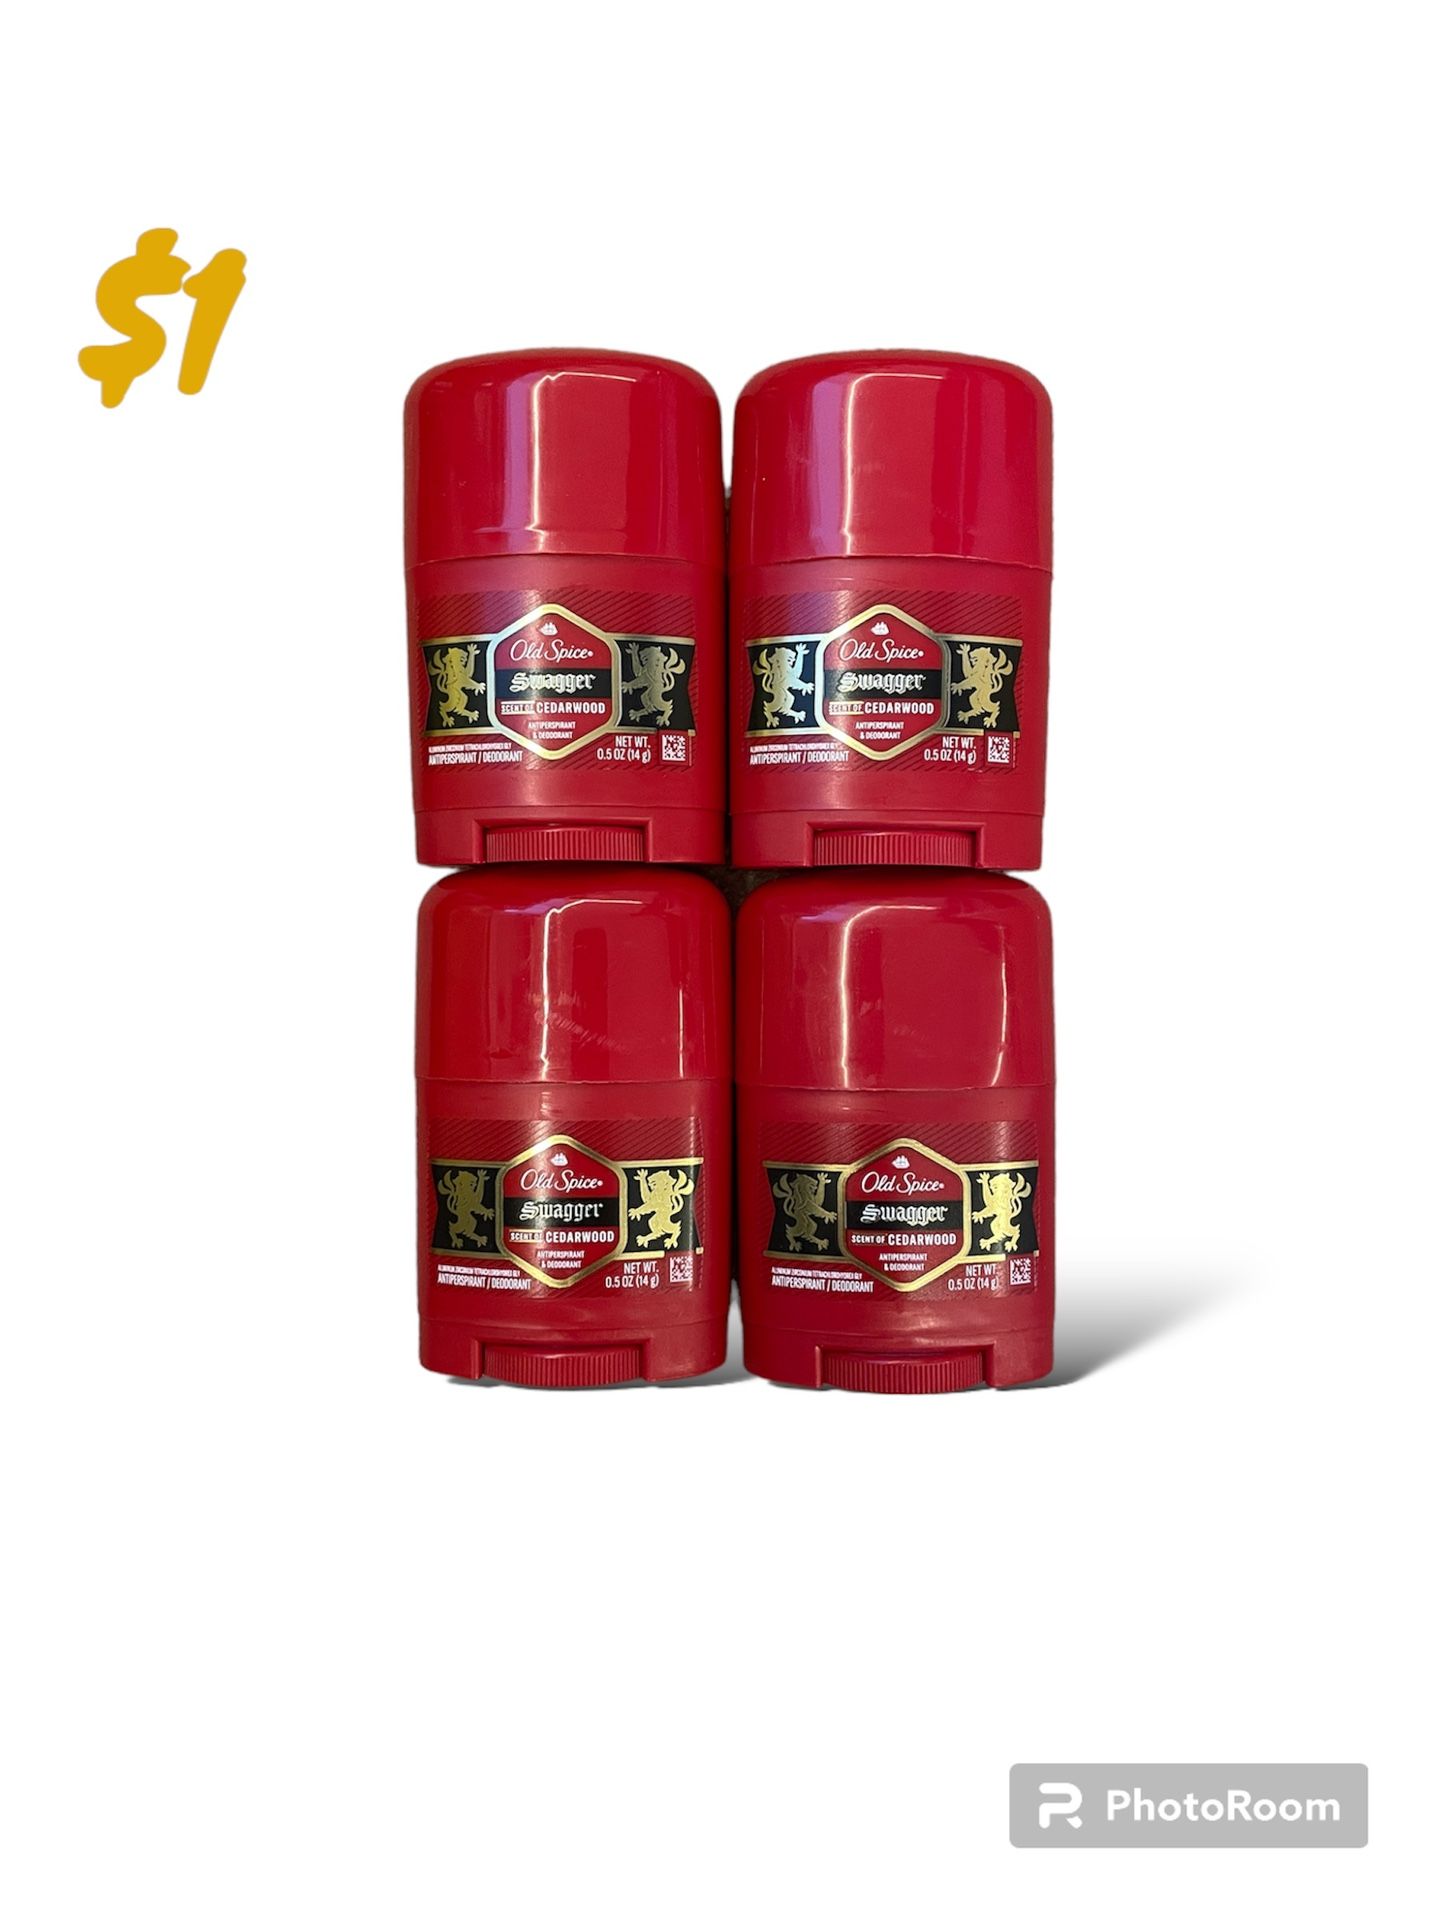 【NEW】Old Spice Travel Size Deodorant